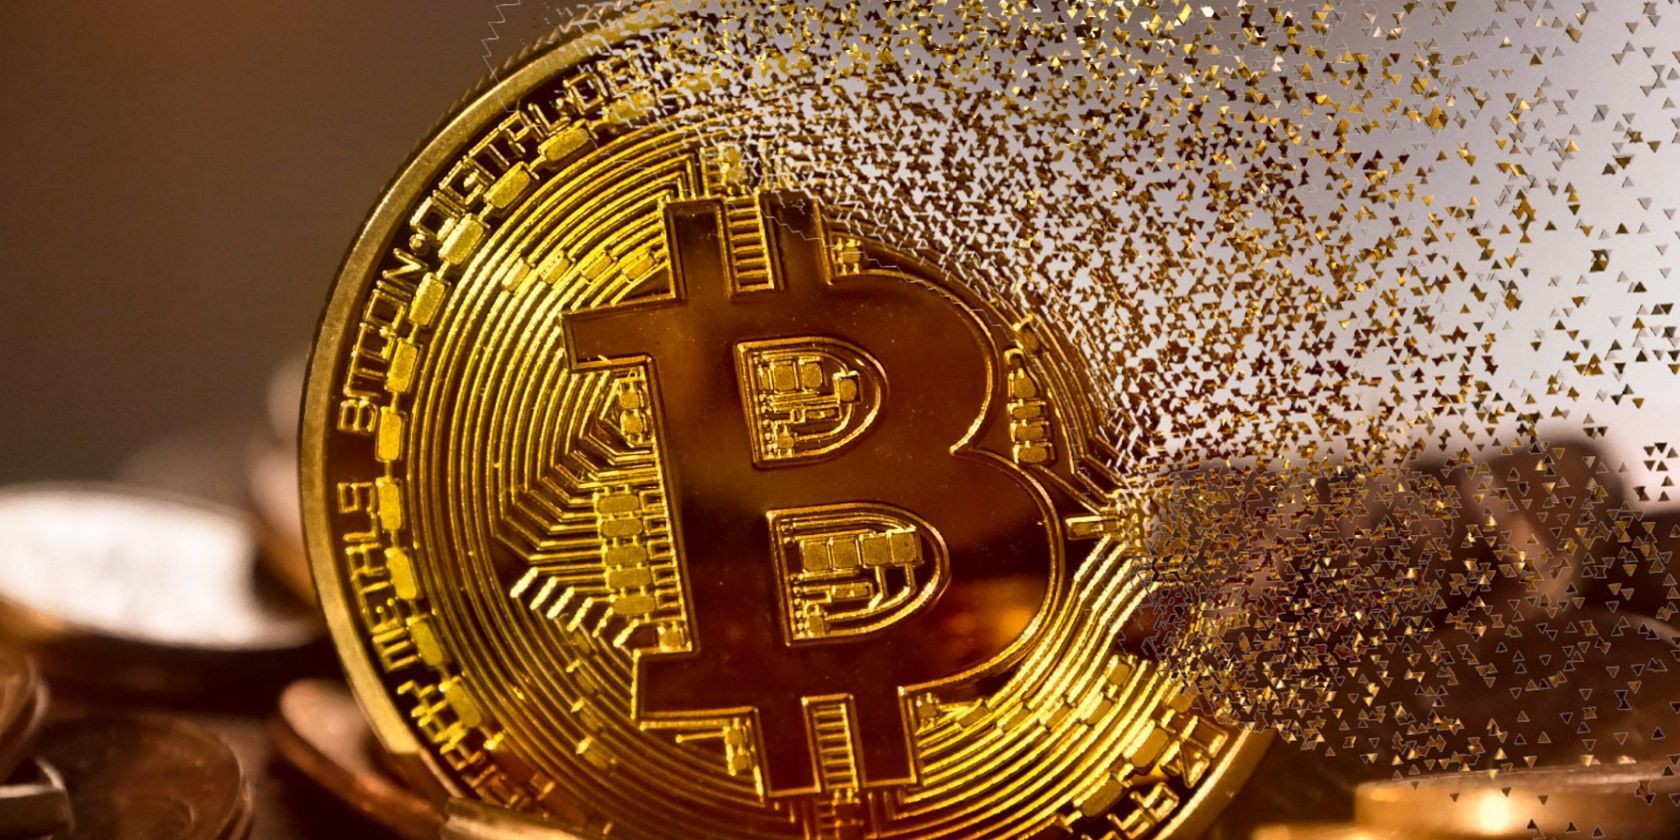 gold bitcoin being split into fragments